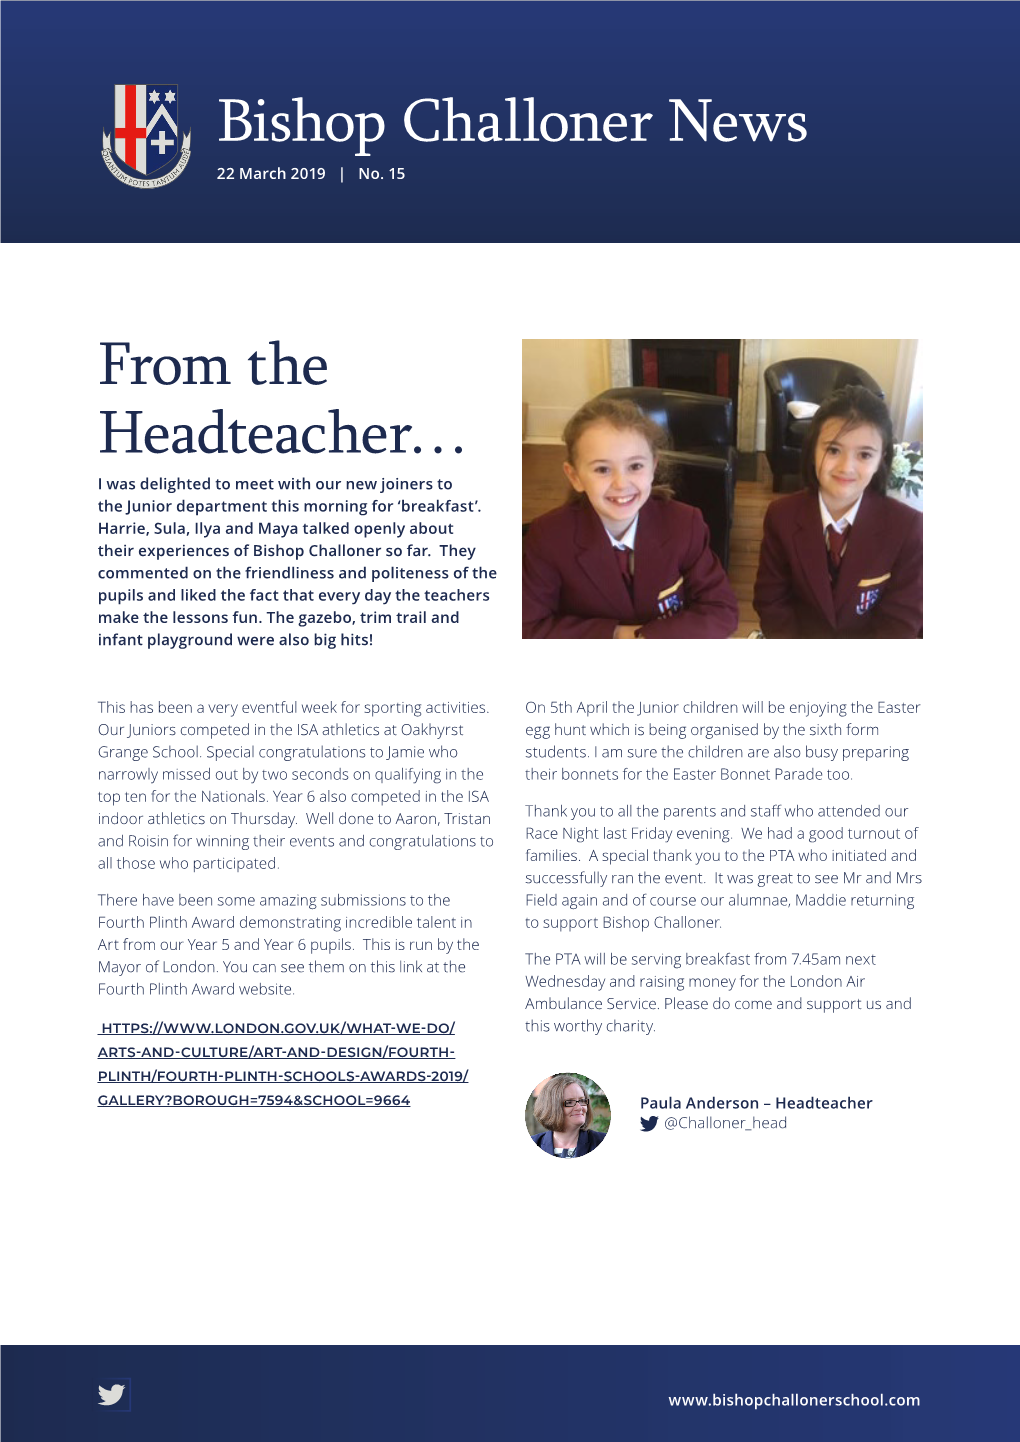 Bishop Challoner News from the Headteacher…